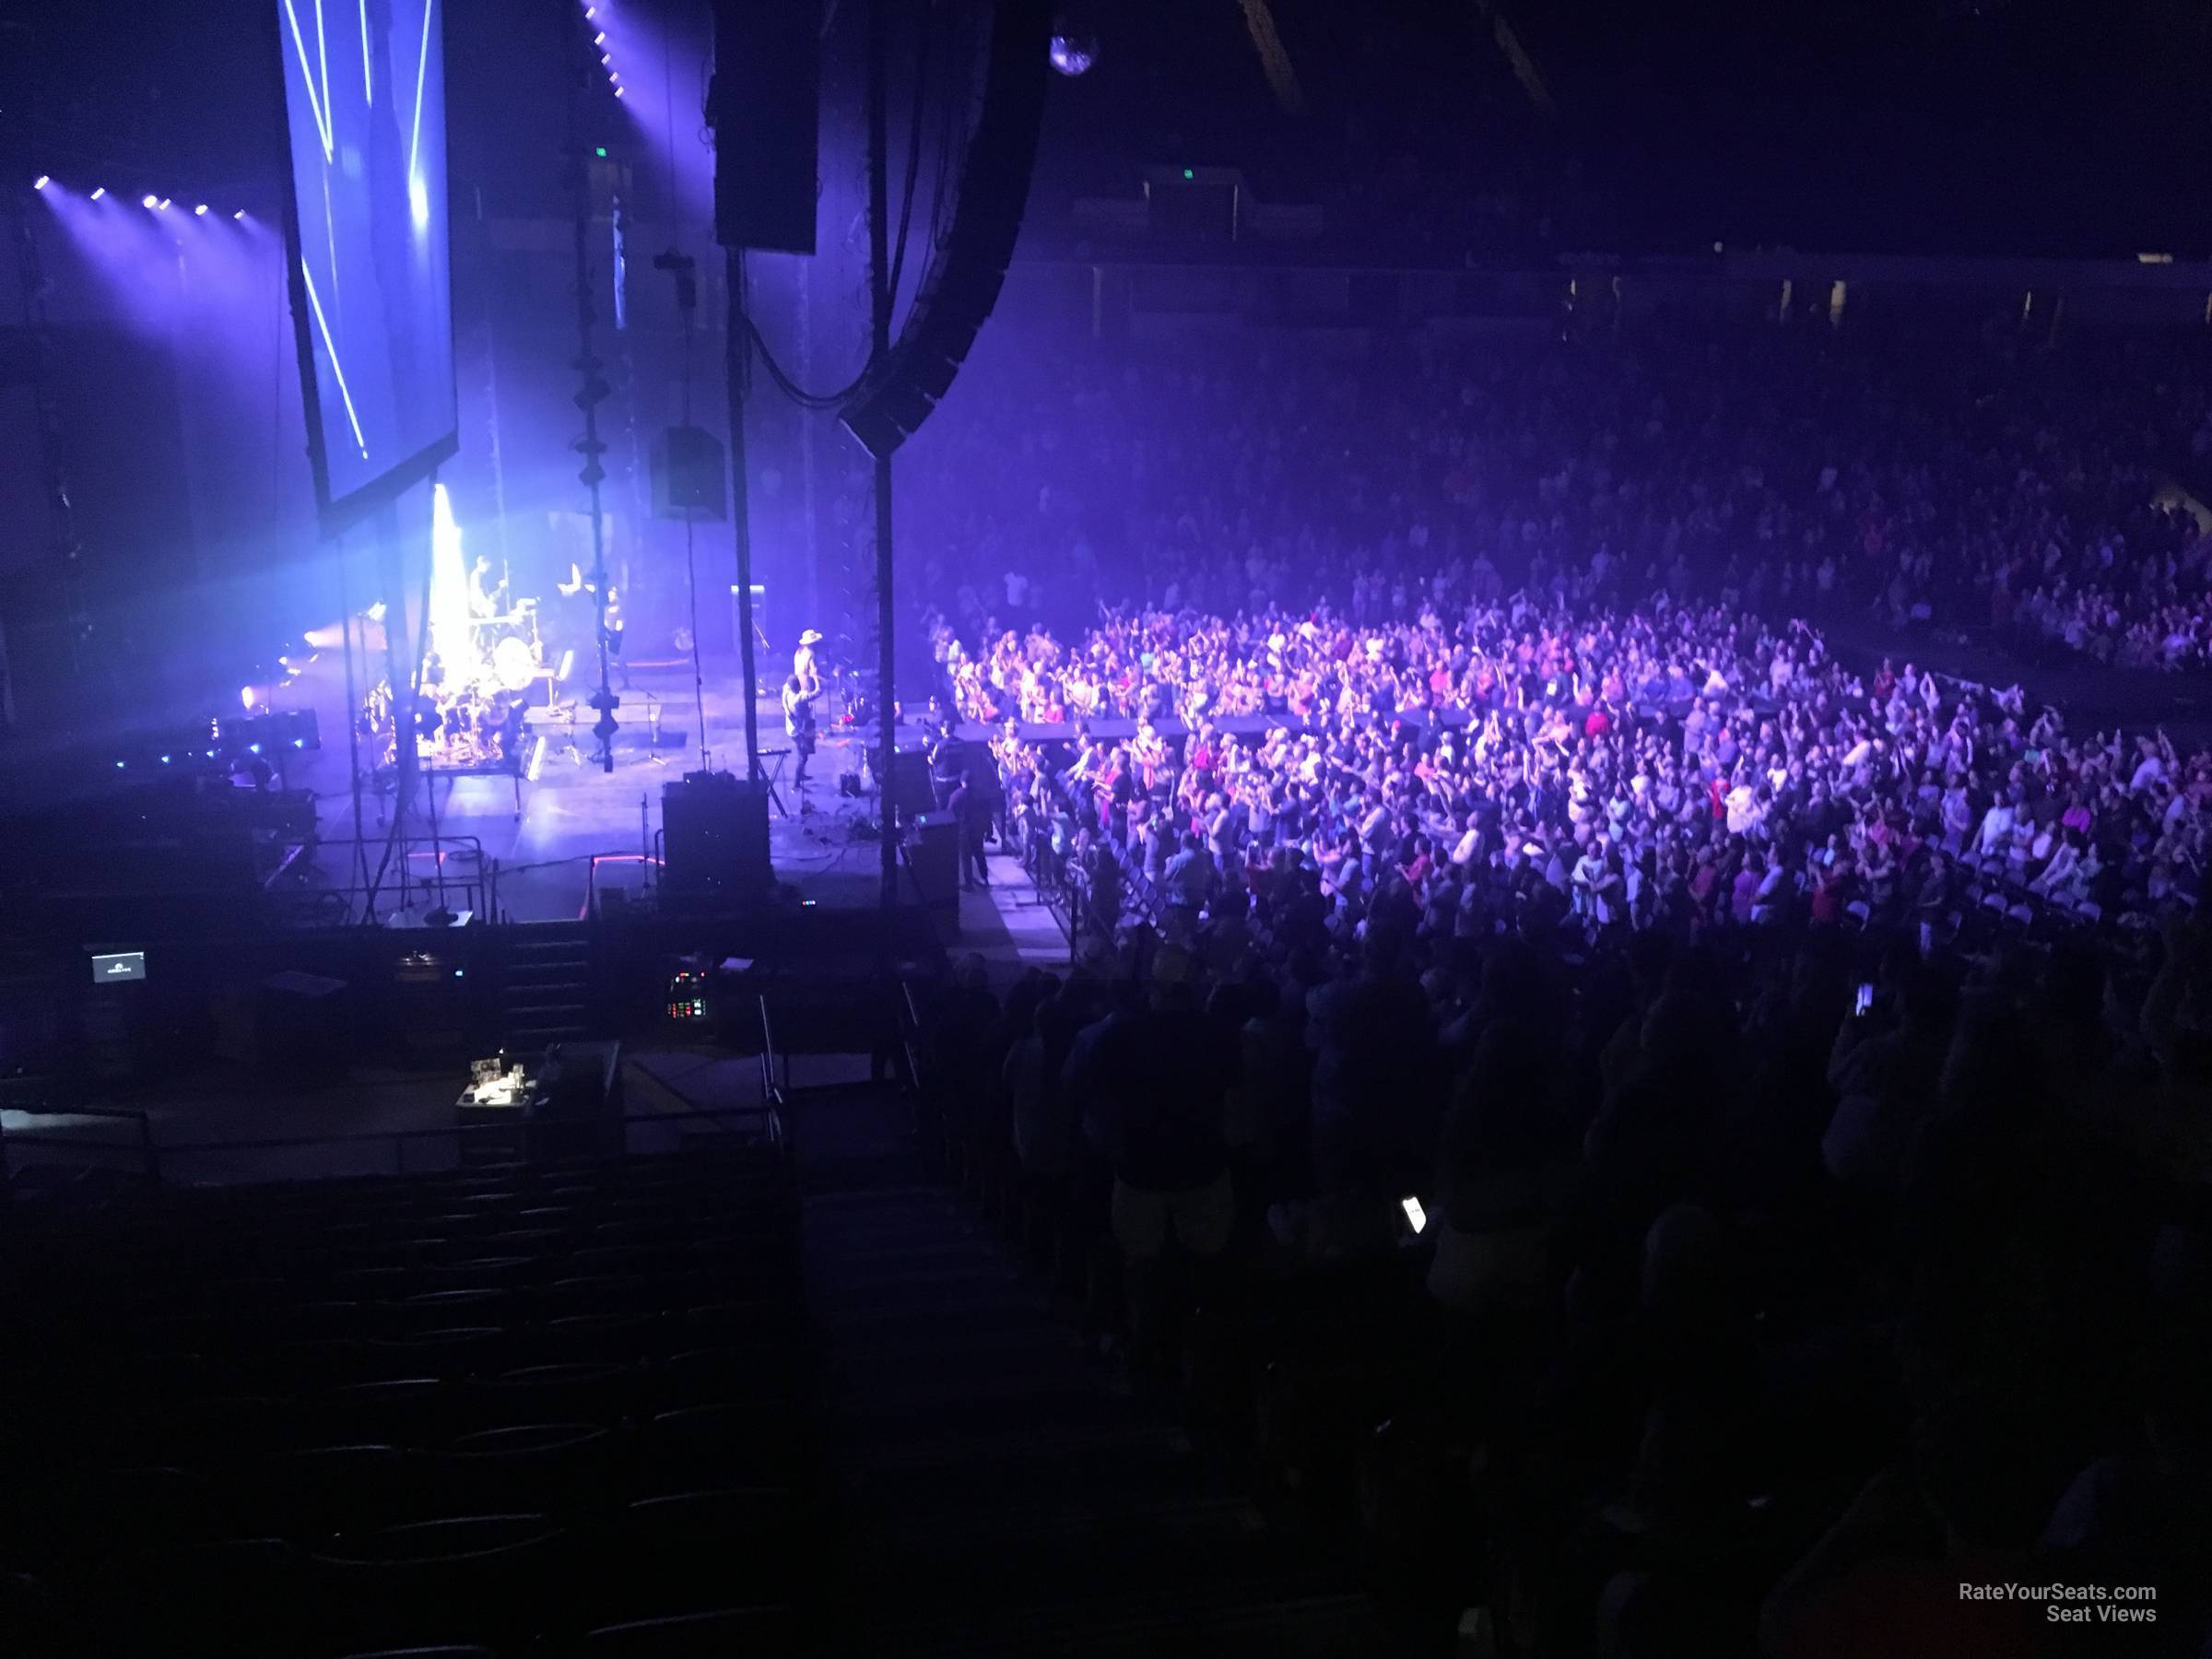 section 132, row w seat view  for concert - legacy arena at the bjcc